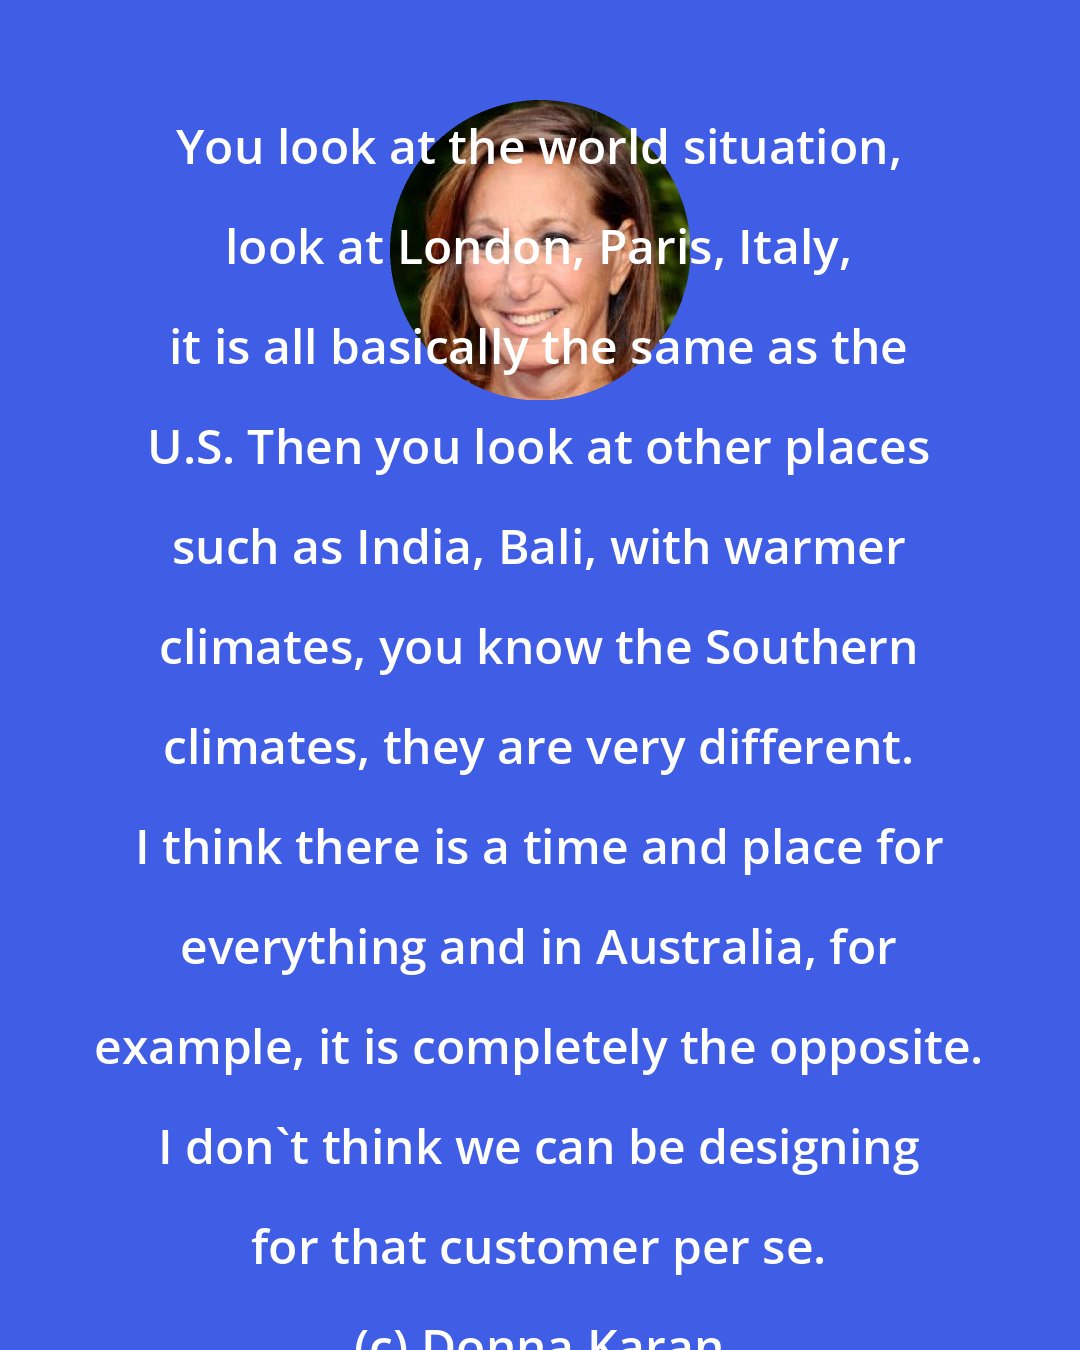 Donna Karan: You look at the world situation, look at London, Paris, Italy, it is all basically the same as the U.S. Then you look at other places such as India, Bali, with warmer climates, you know the Southern climates, they are very different. I think there is a time and place for everything and in Australia, for example, it is completely the opposite. I don't think we can be designing for that customer per se.